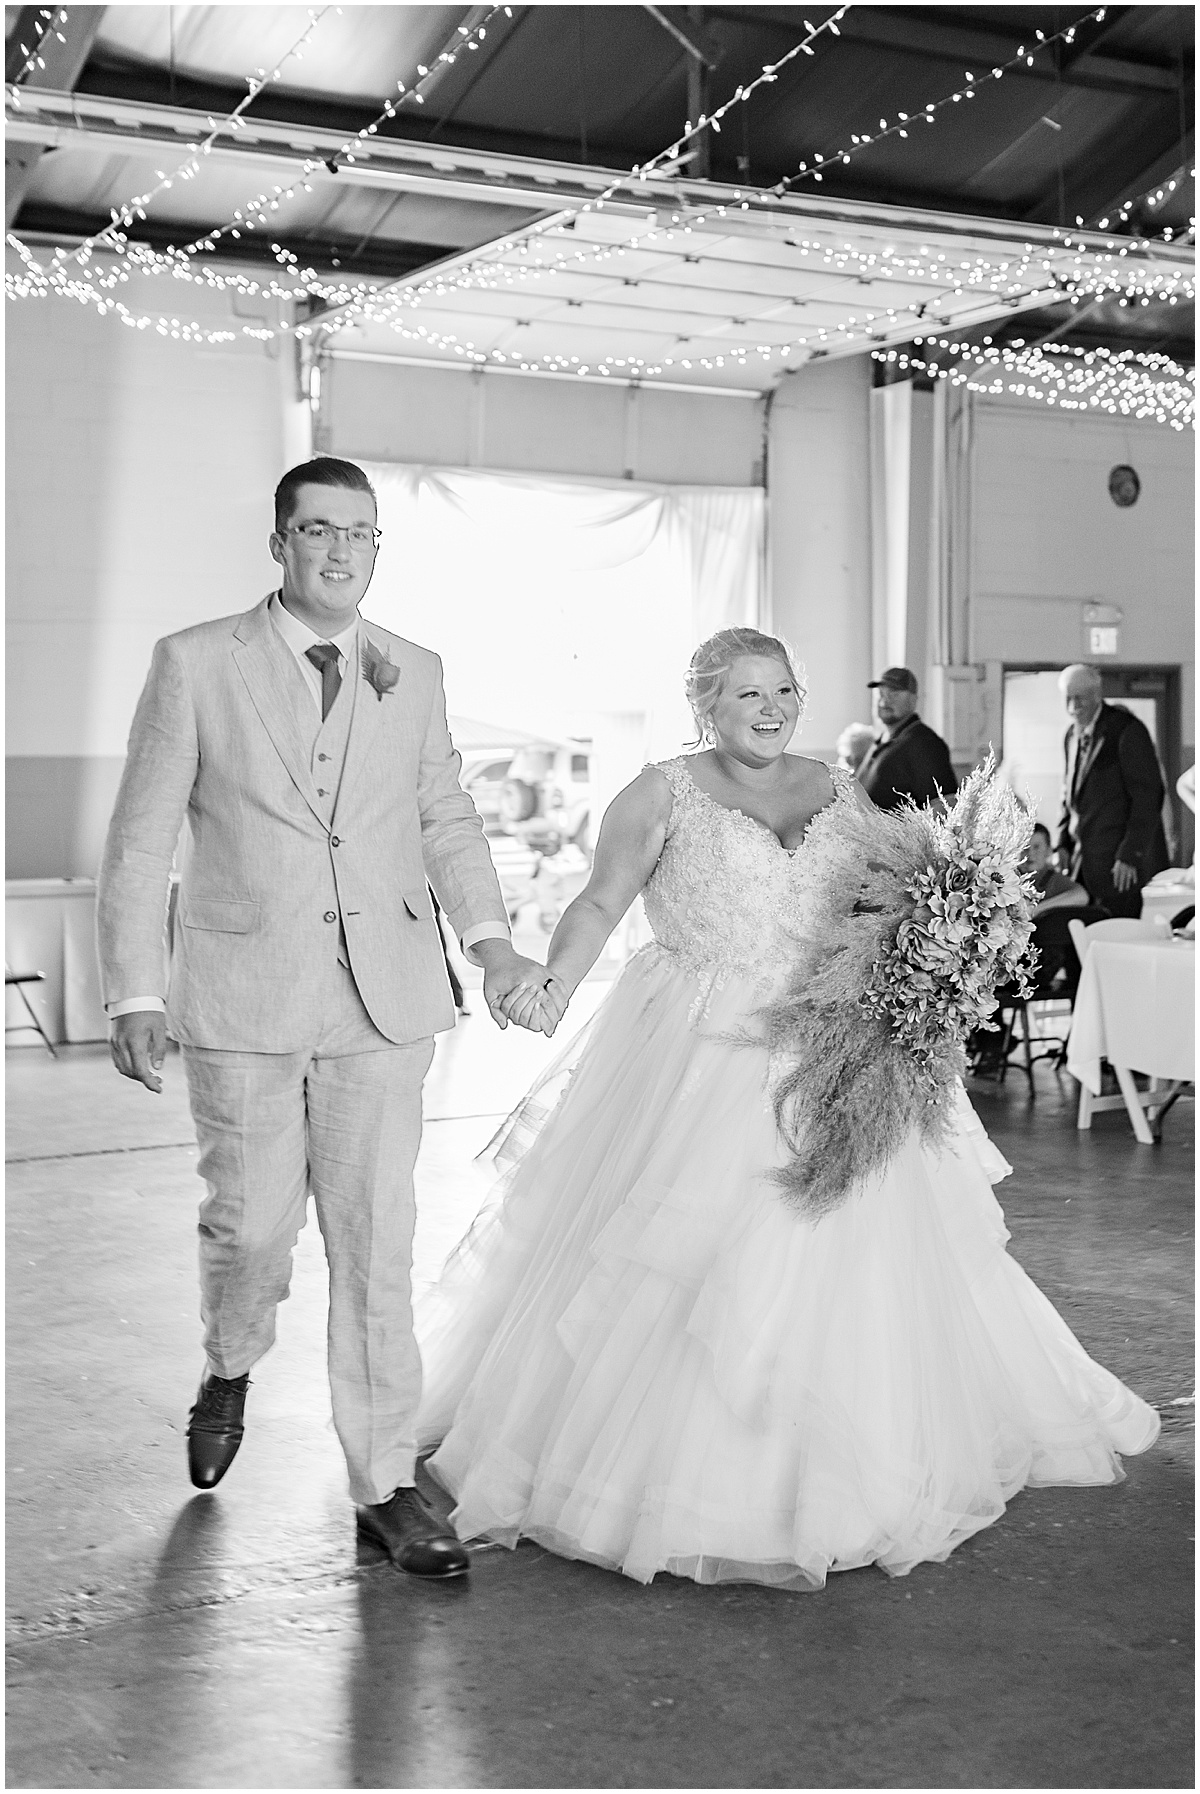 Bride and groom enter reception at Miami County Fairgrounds wedding in Peru, Indiana